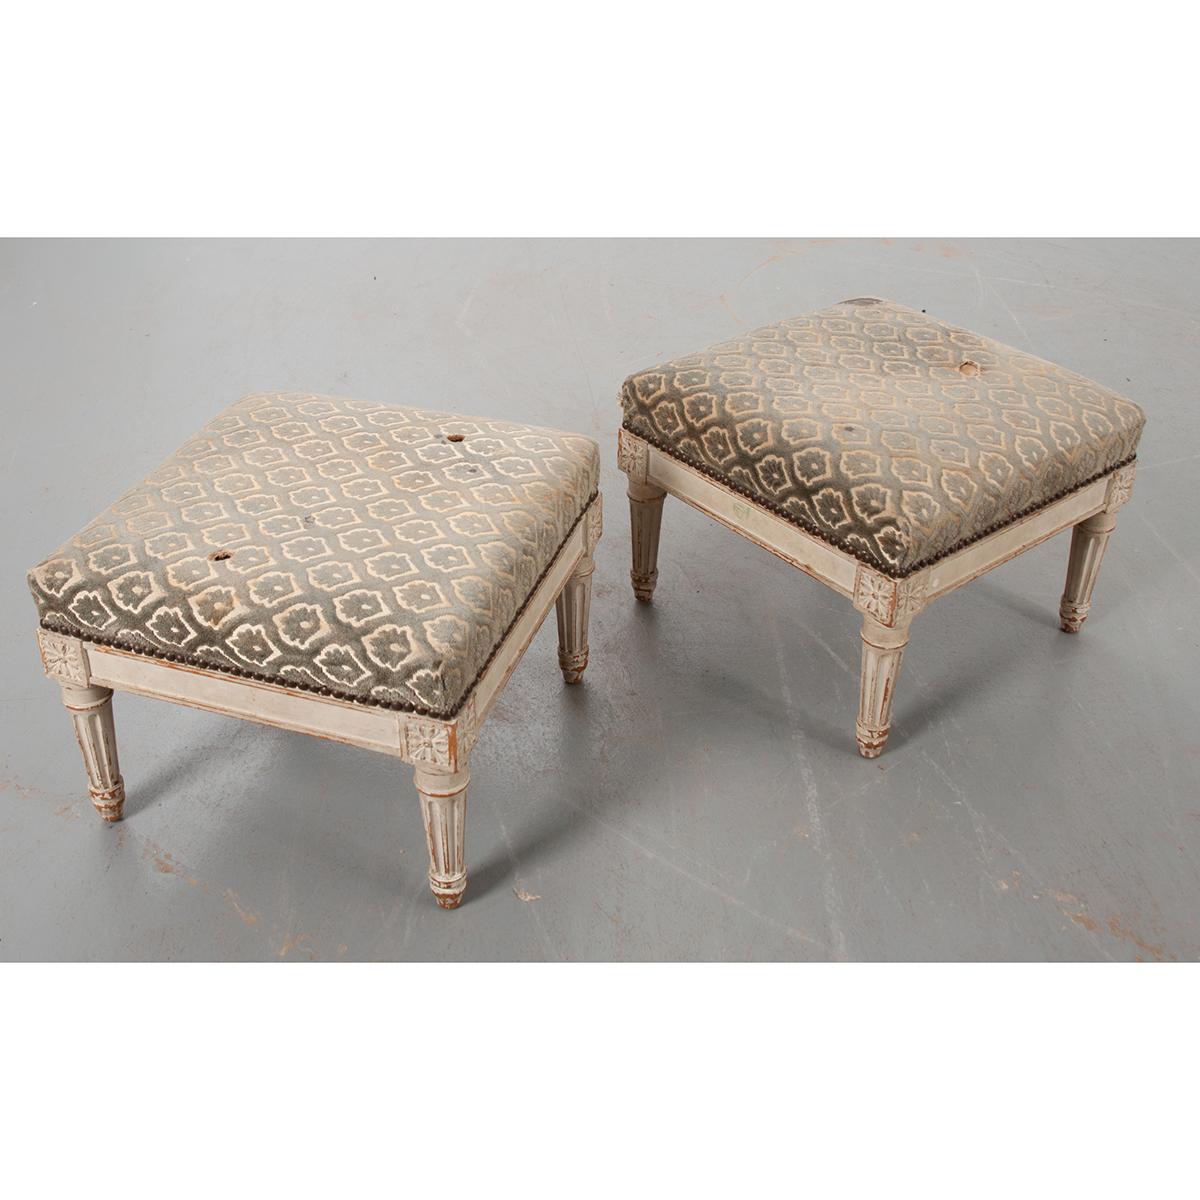 A pair of French 19th century Louis XVI-style foot stools. The worn upholstery is secured on the stool with a nailhead trim. They have their original painted finish. Rosettes are carved on each corner of the foot stools. All sit on turned fluted